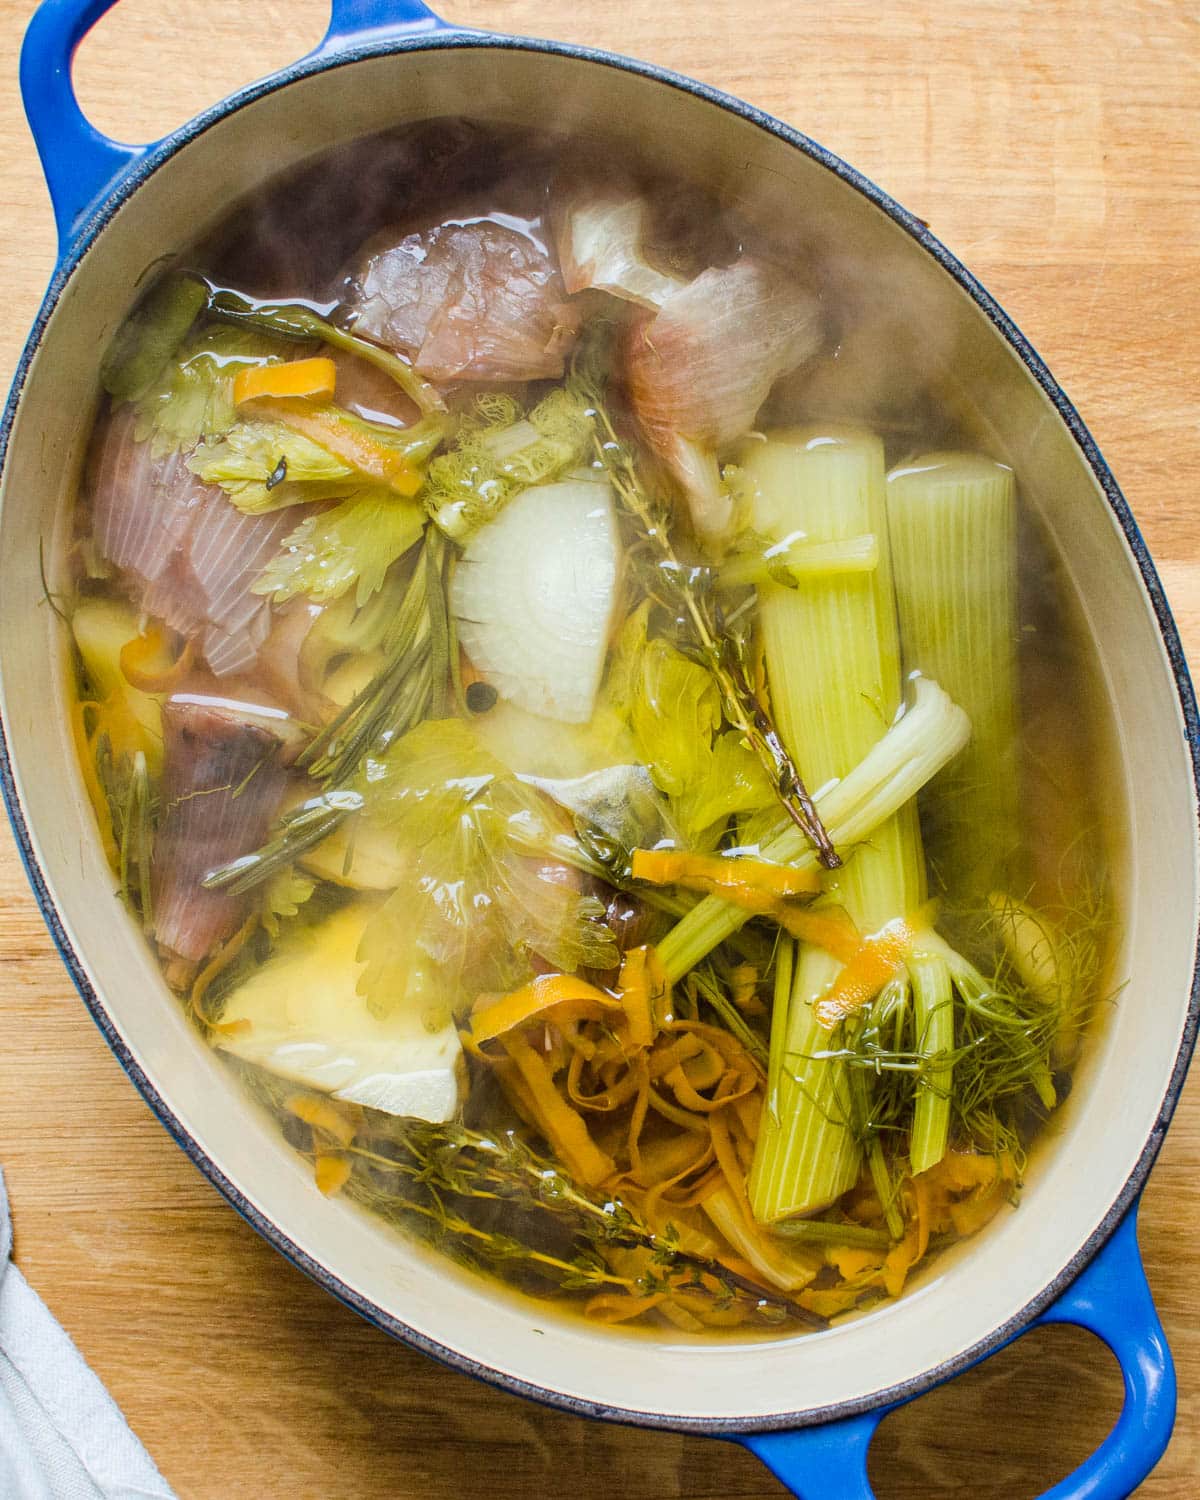 The scraps vegetable broth after simmering. 